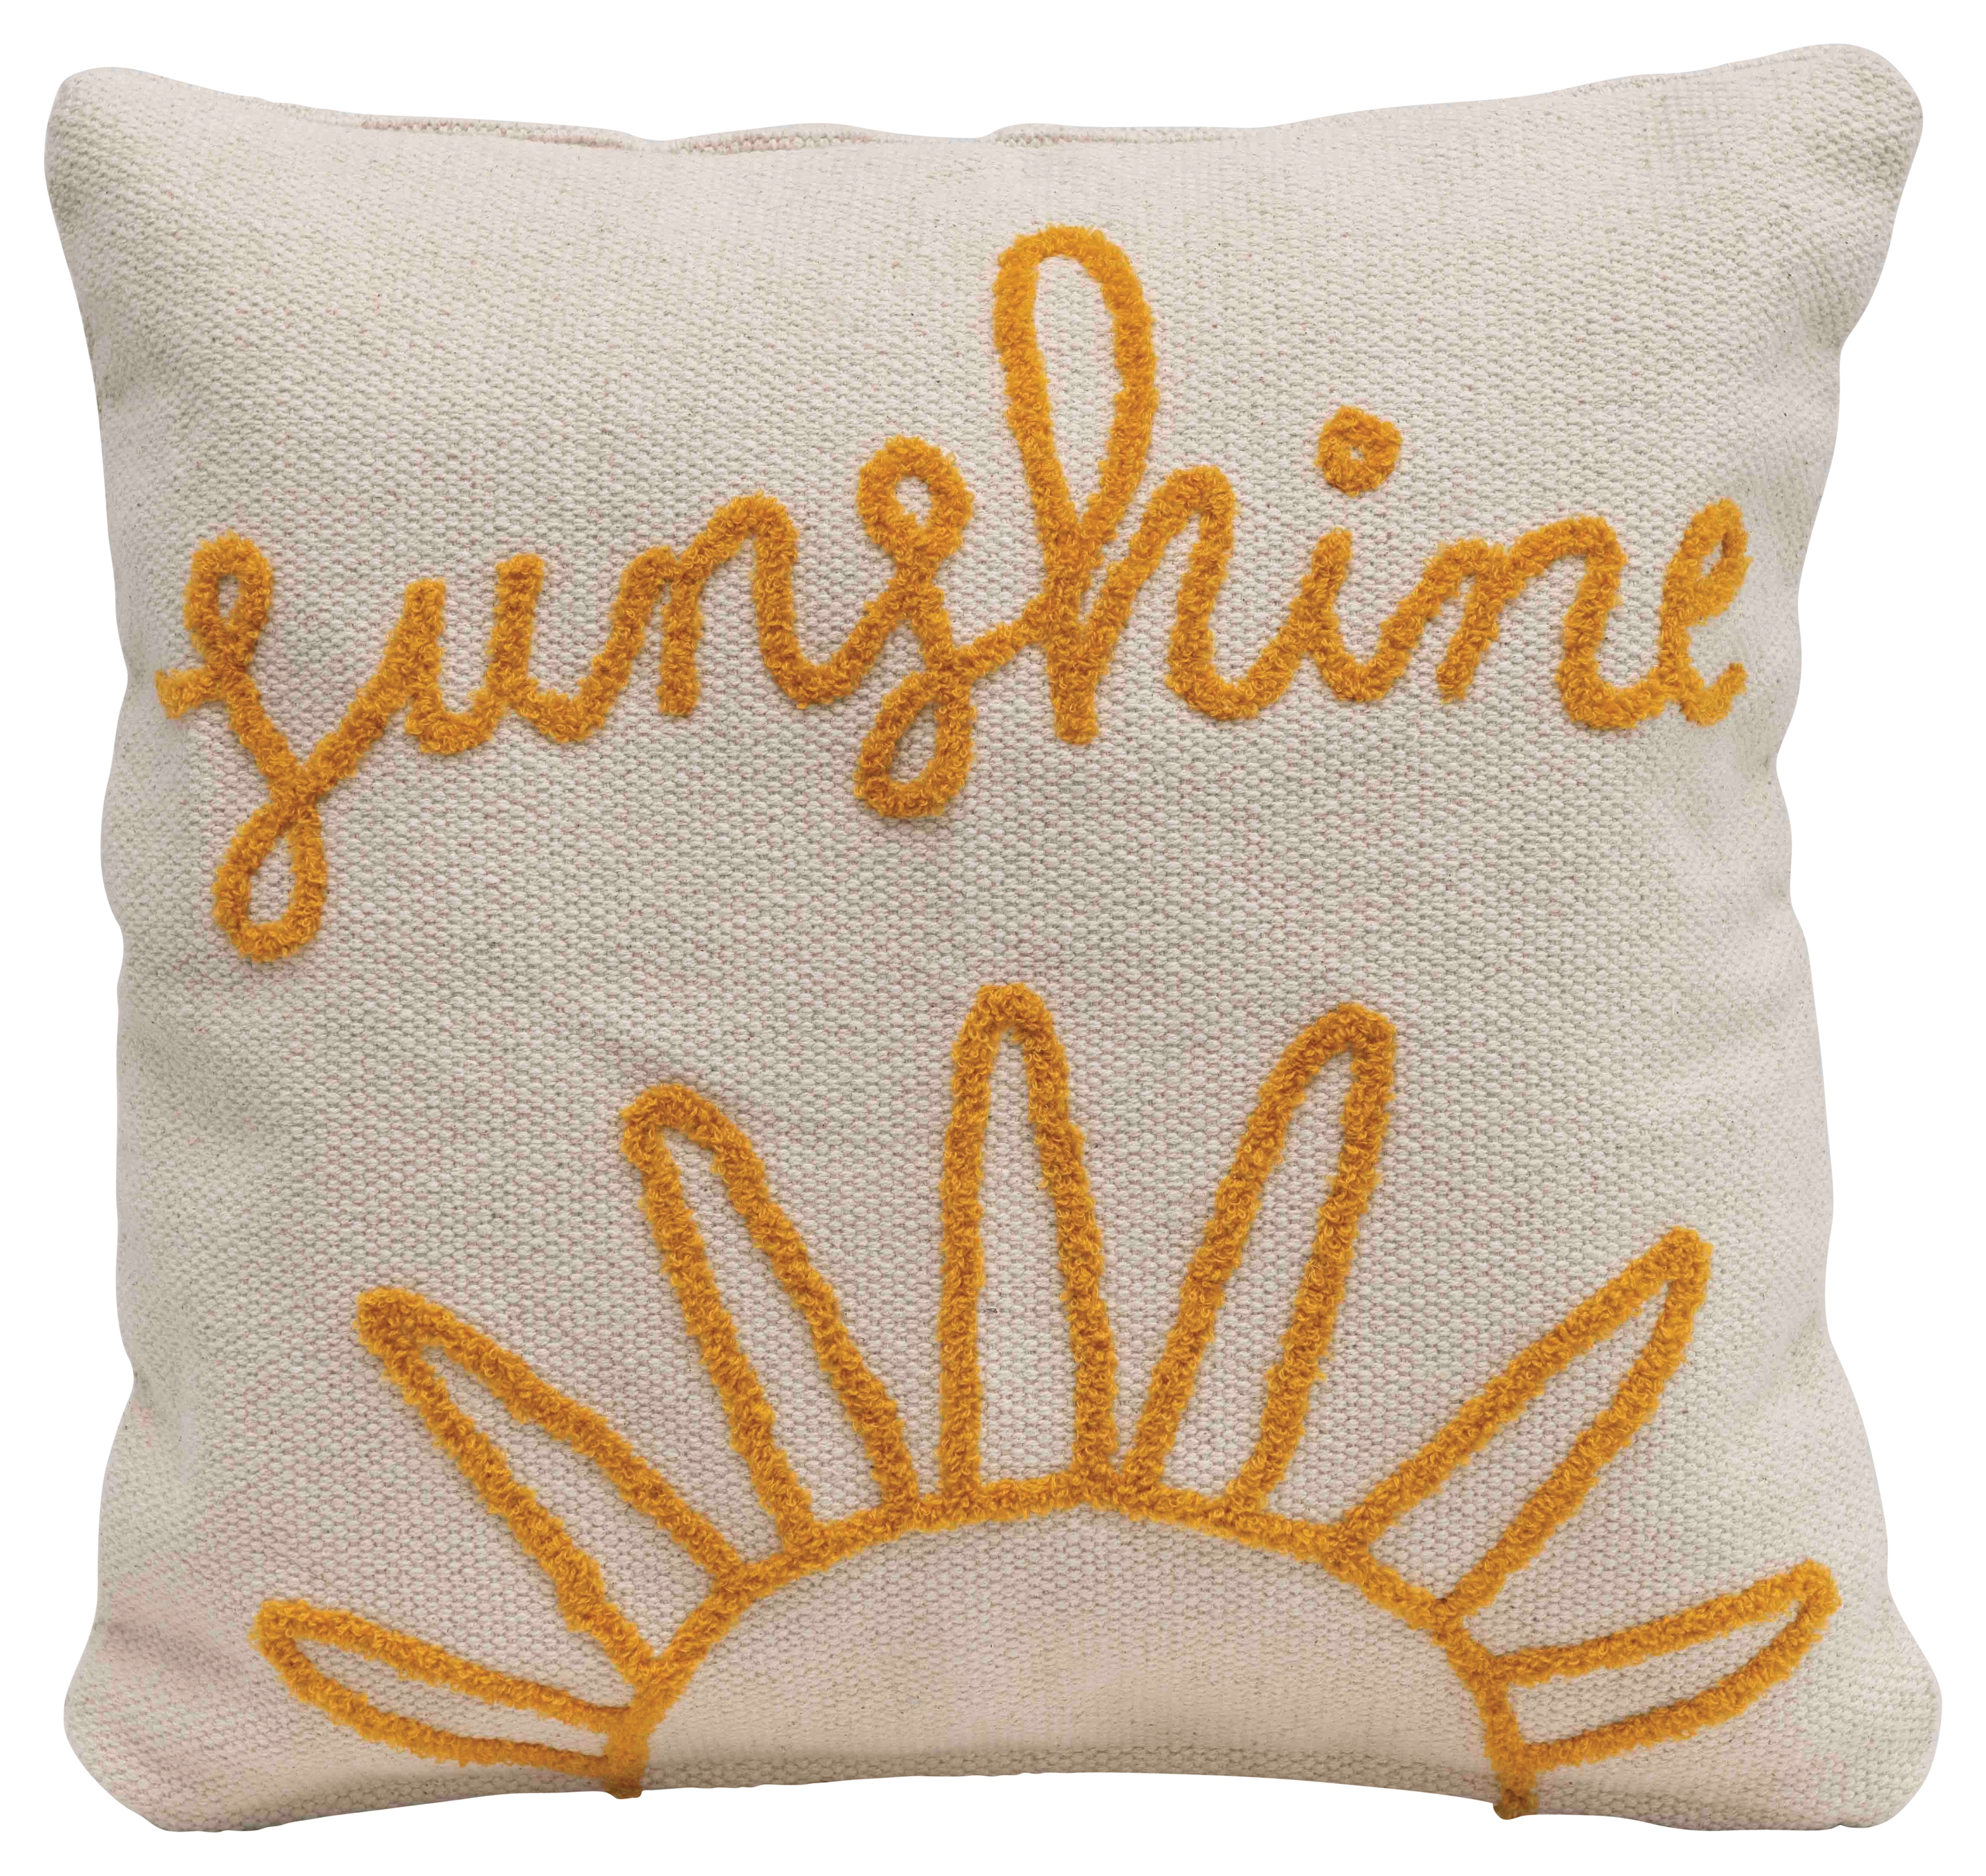 "Sunshine" Embroidered Square Cotton Pillow - Image 0